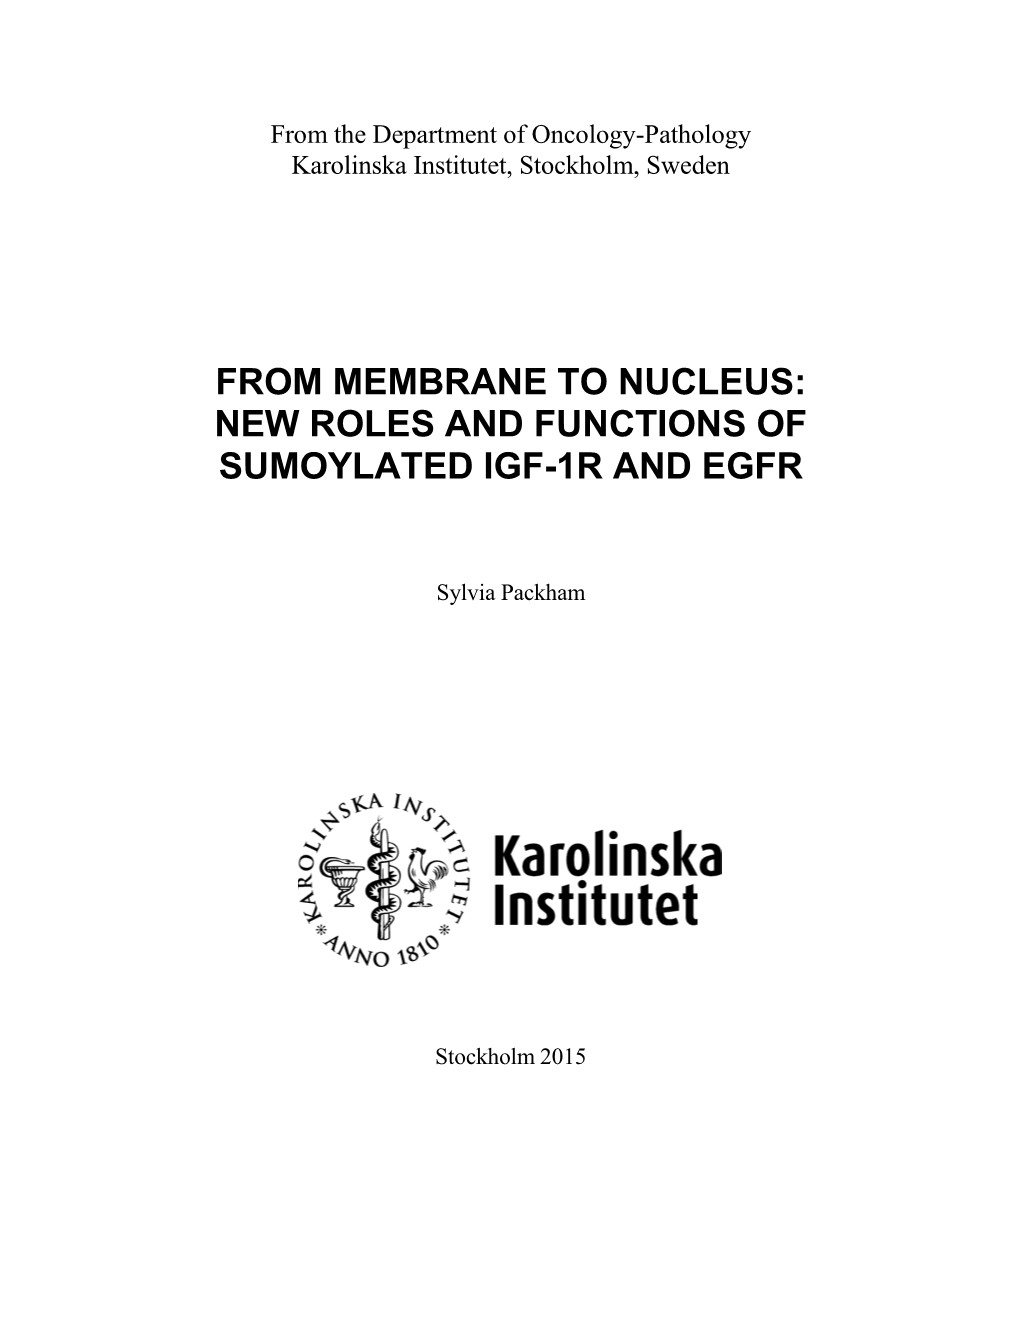 Thesis Was to Elucidate the Function of Recently Discovered Nuclear IGF-1R As Well As to Investigate Its Nuclear Translocation Pathway